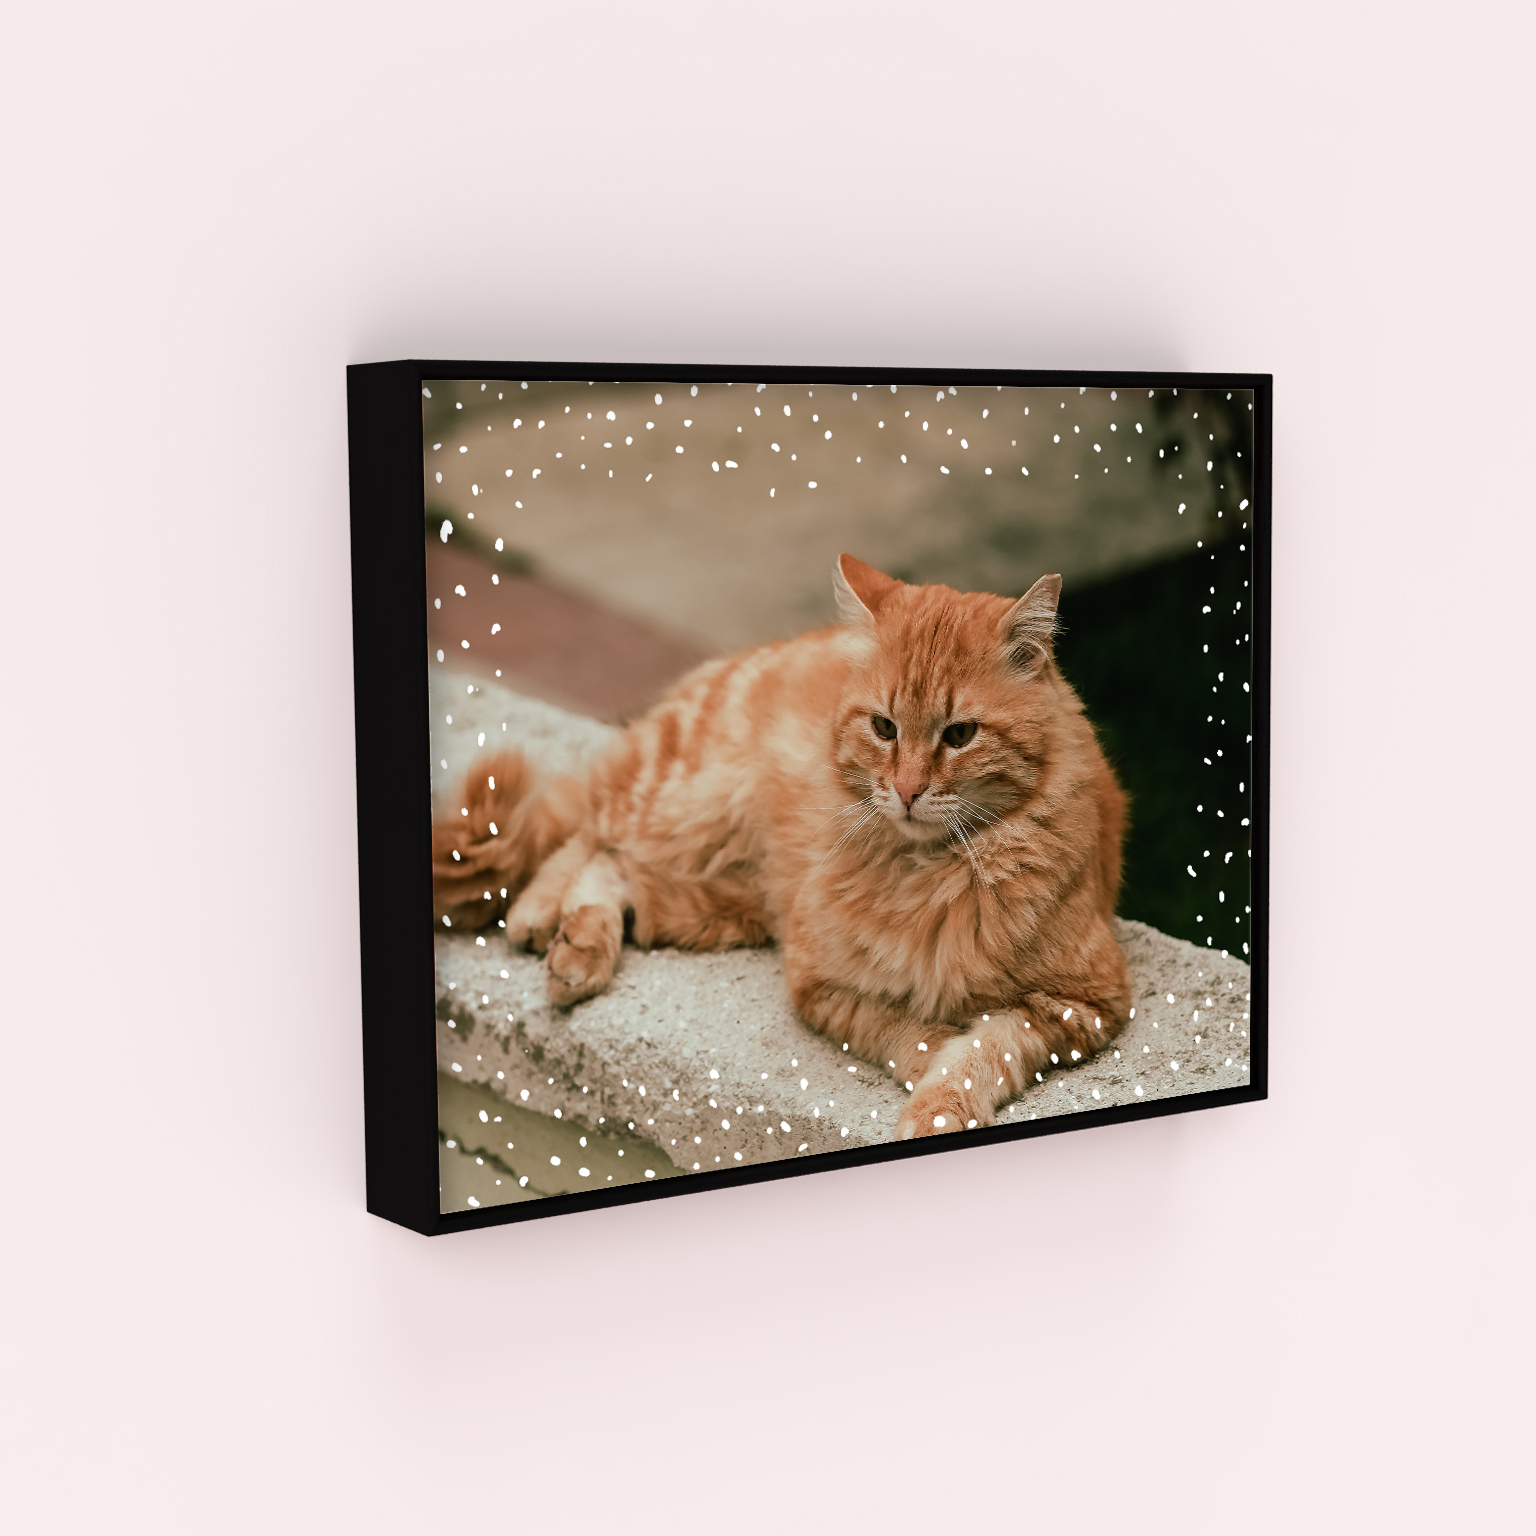 Dotted Framed Photo Canvases - Striking Visual Appeal for Heartfelt Moments